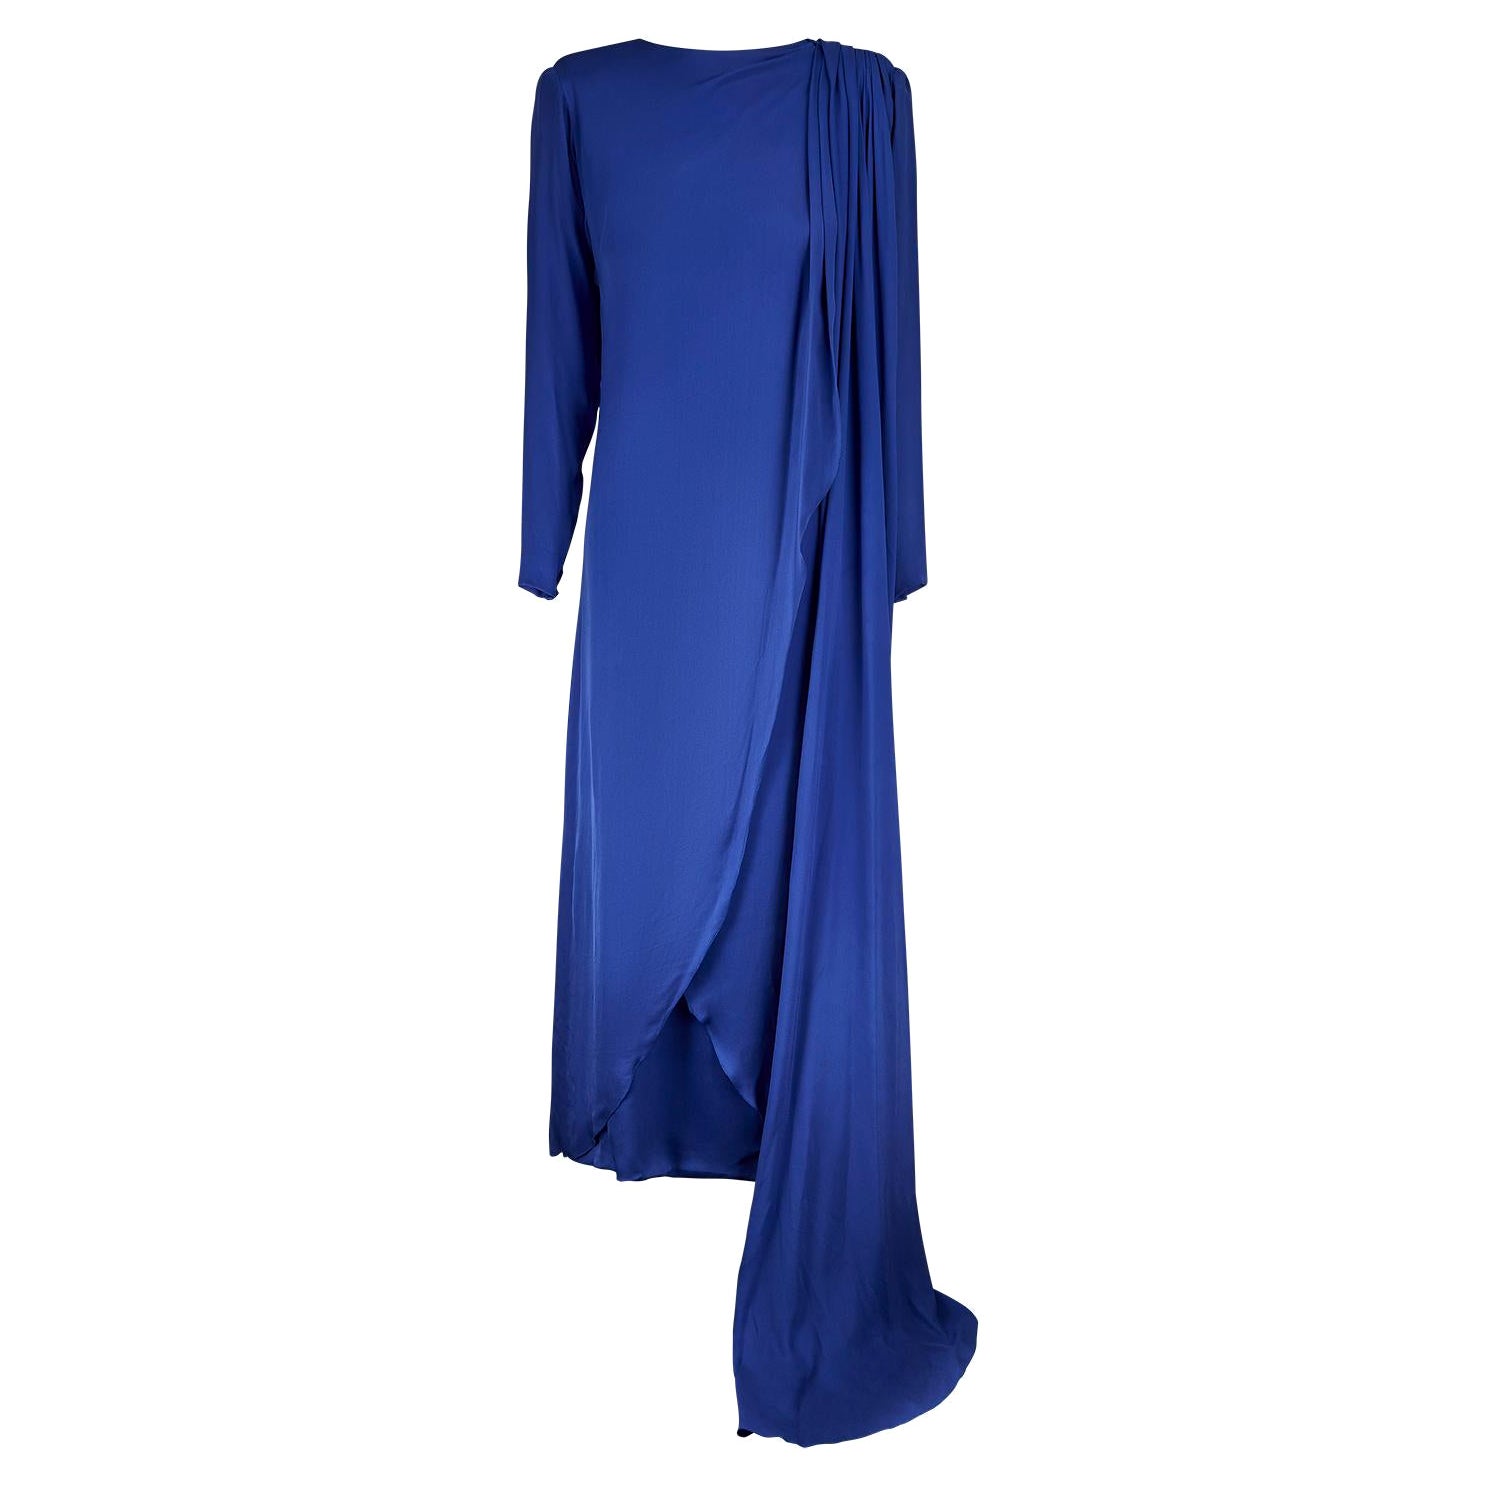 Christian Dior by Galliano Early Sapphire Blue Silk Demi Couture Dress ...